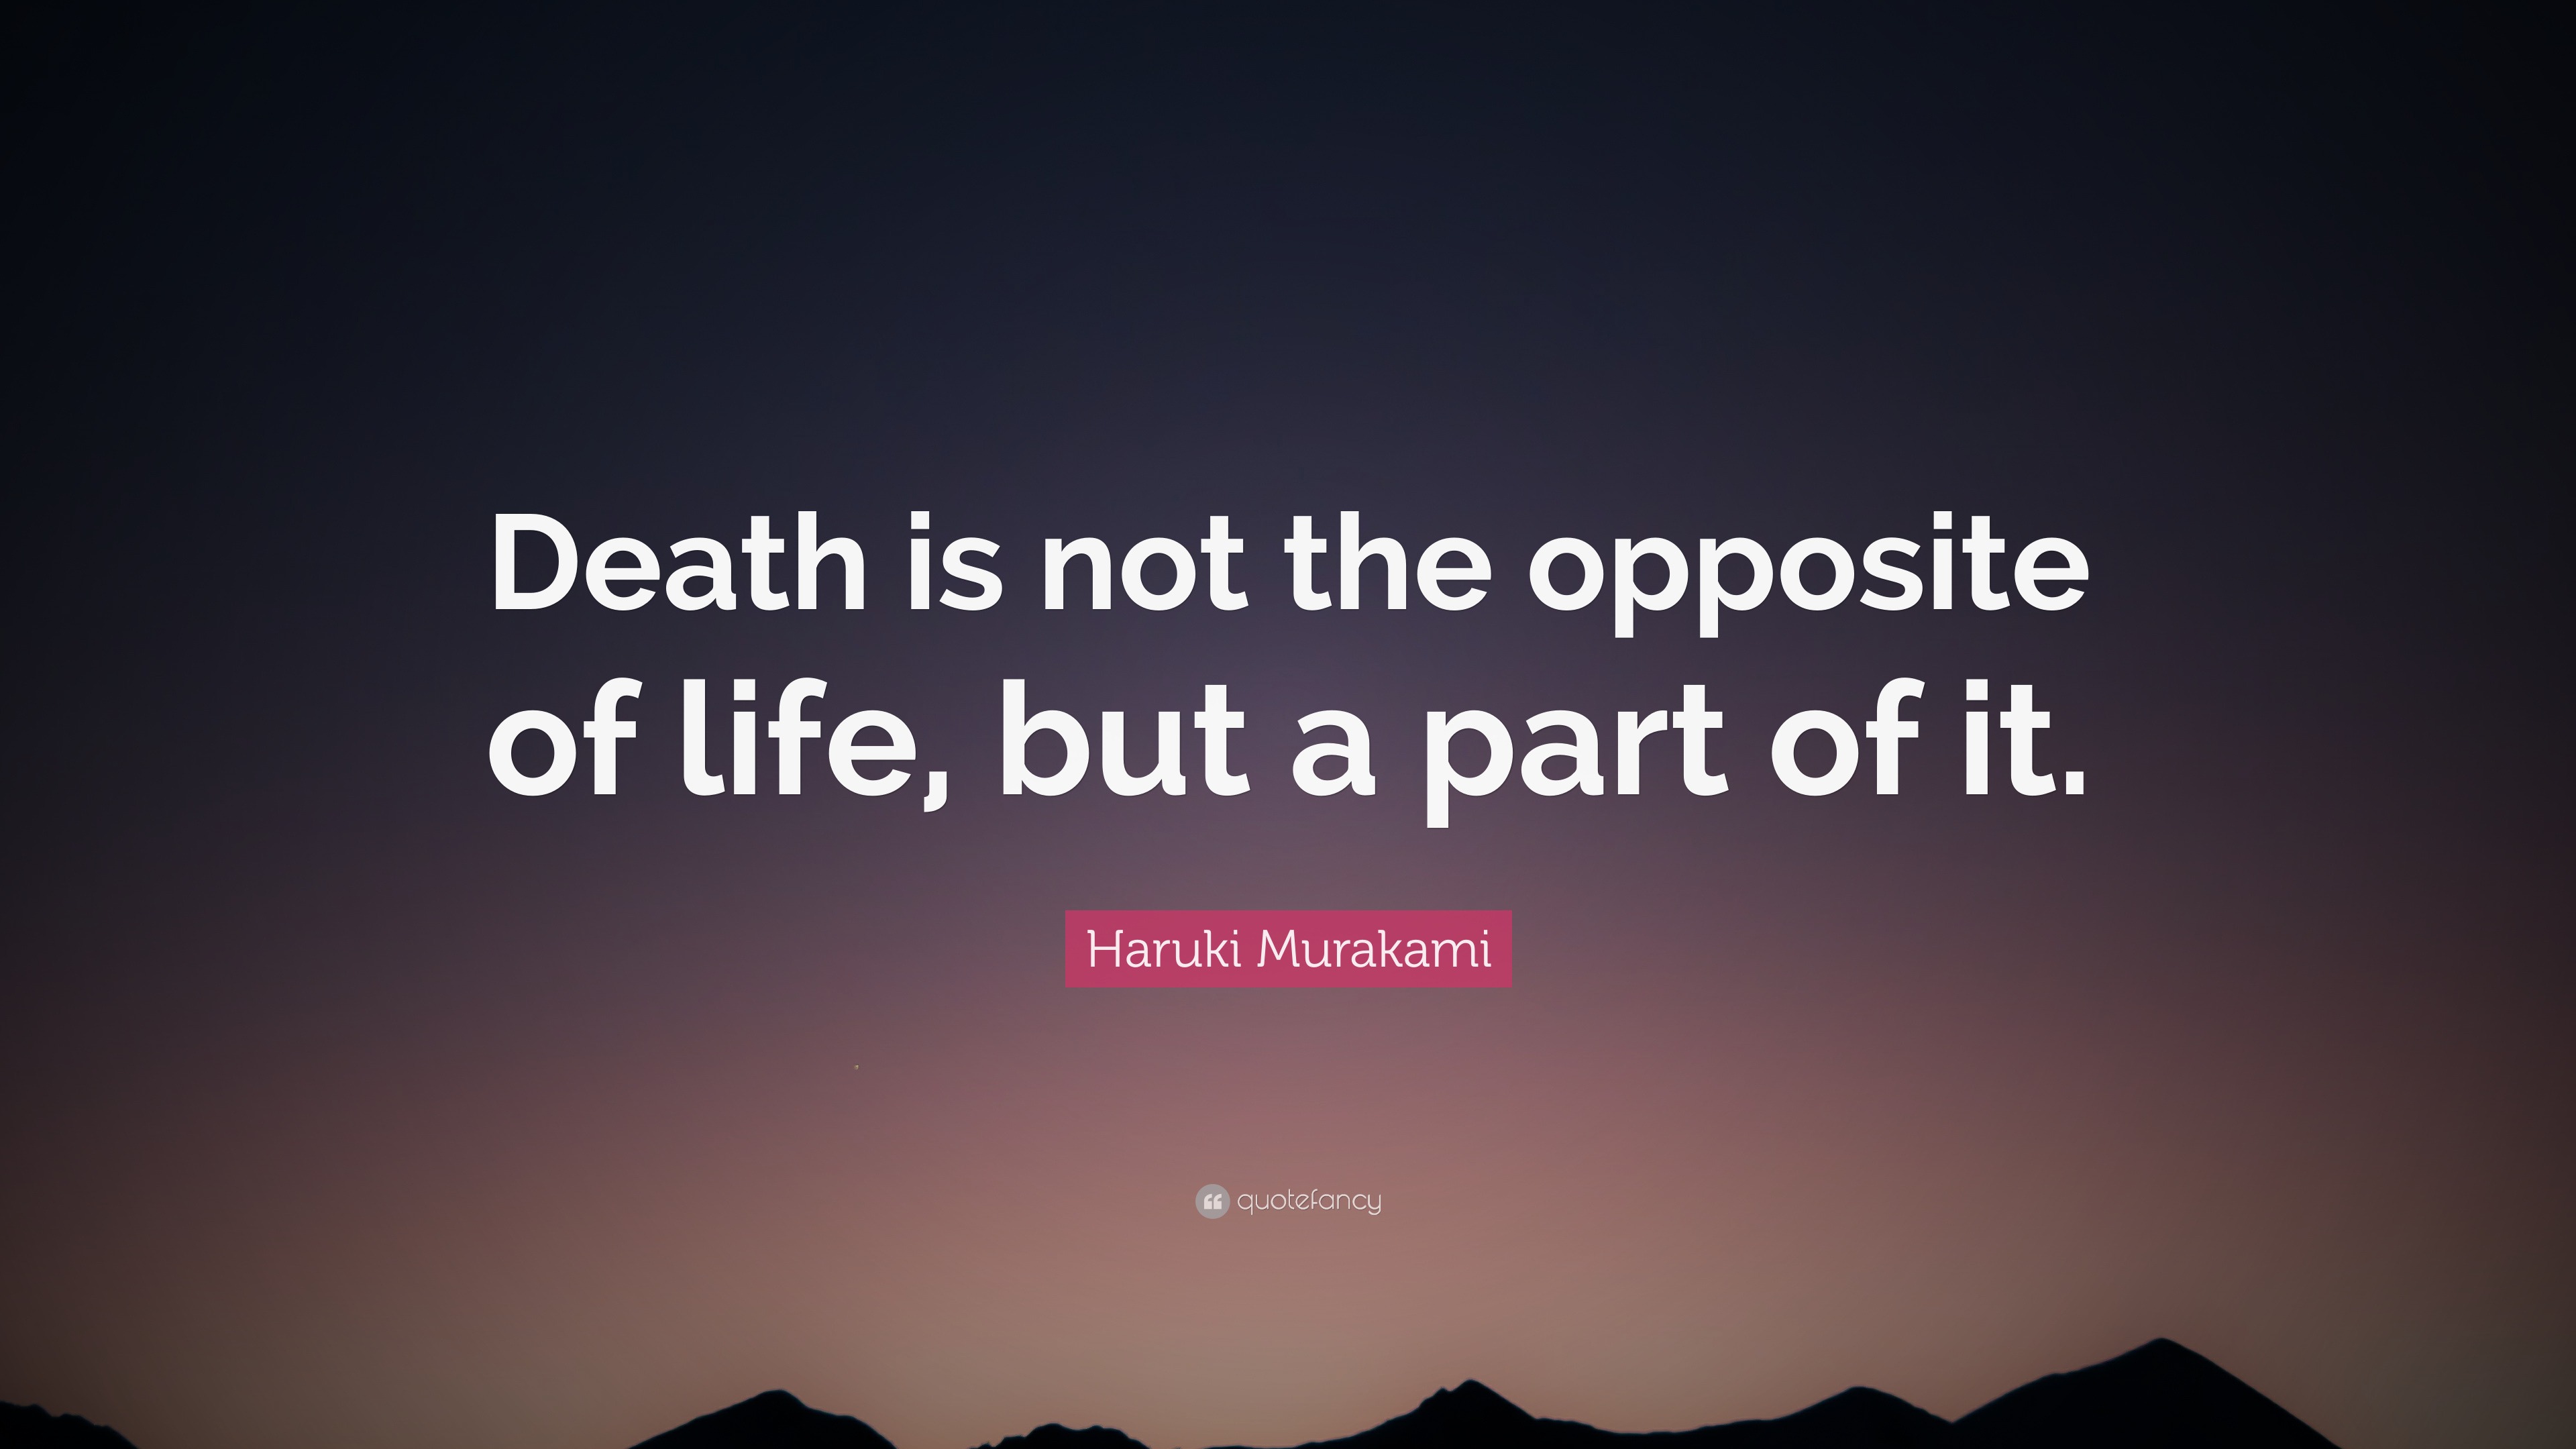 Haruki Murakami Quote: “Death is not the opposite of life, but a part ...